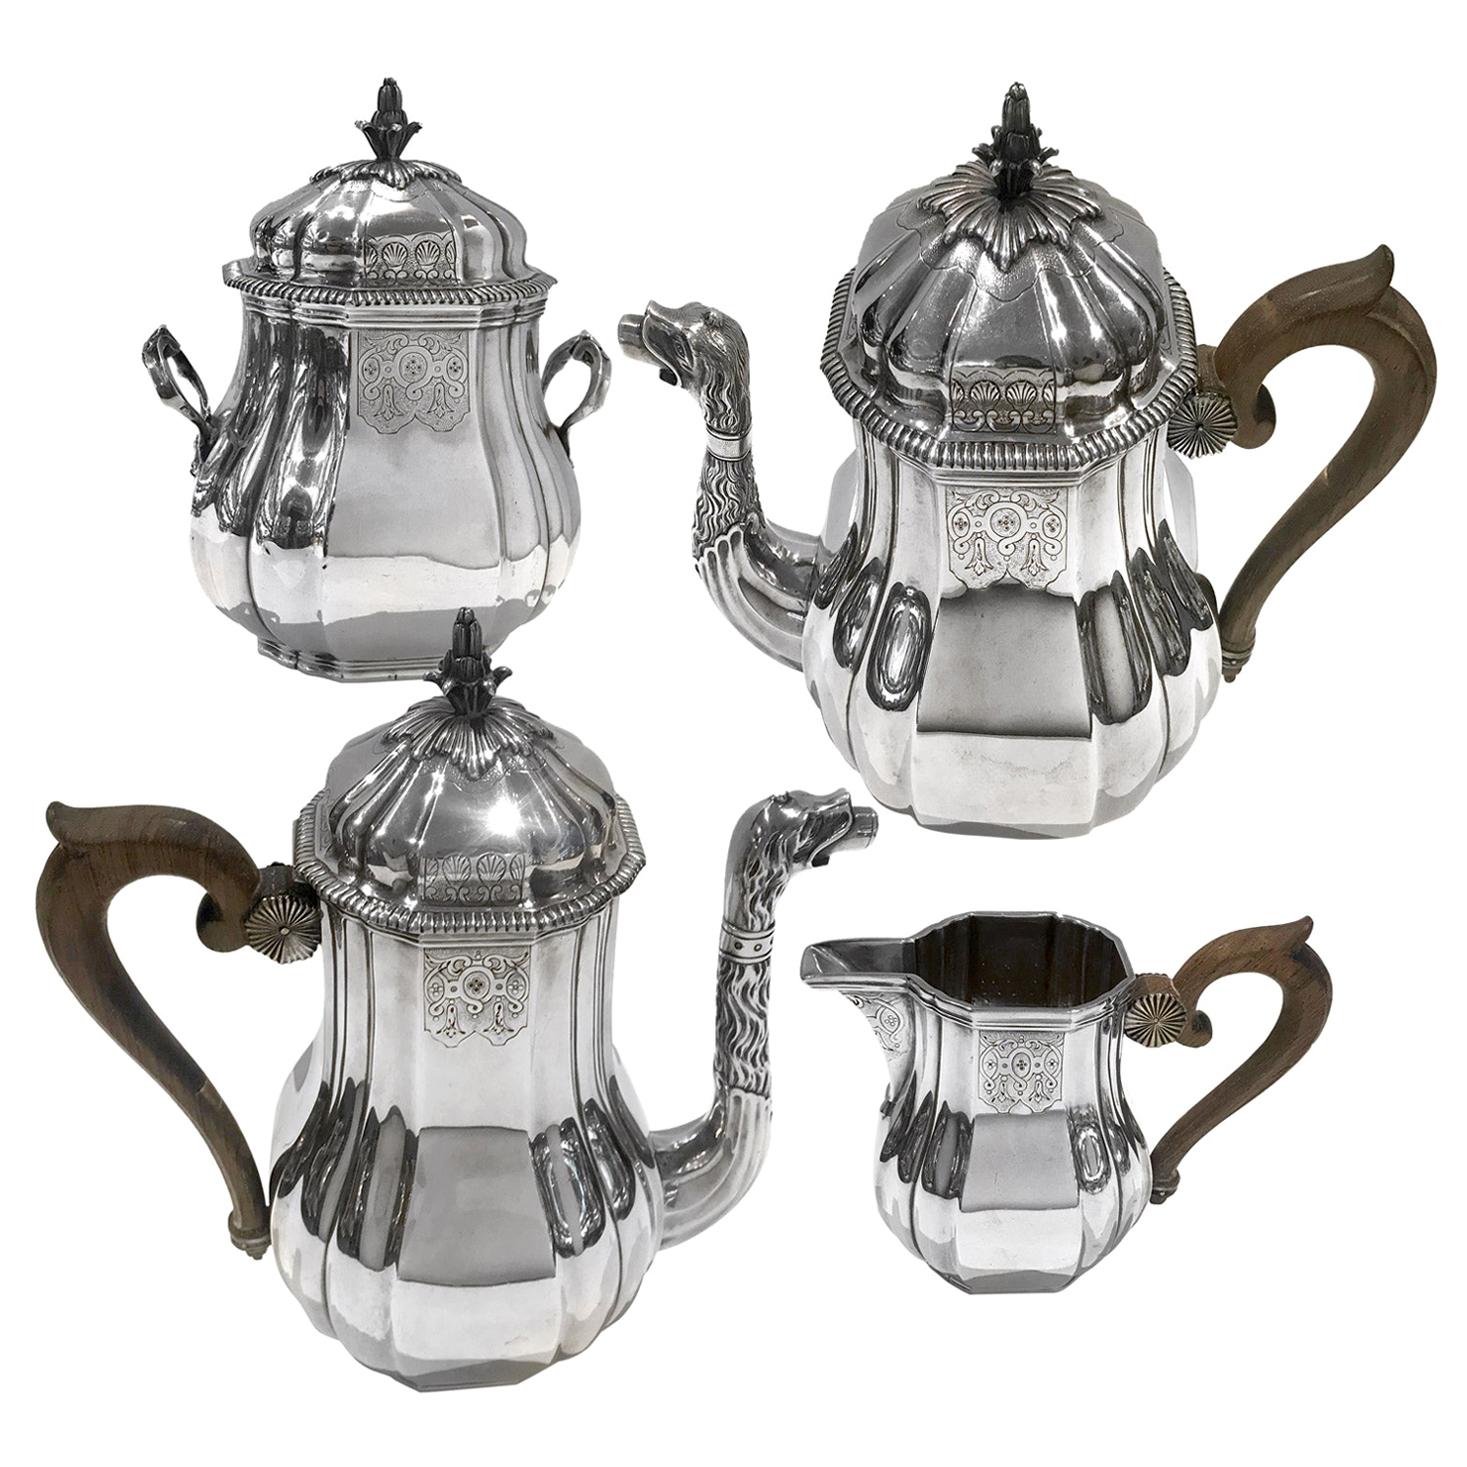 Tea and Coffee Set in Sterling Silver by Falkenberg, 1894-1928